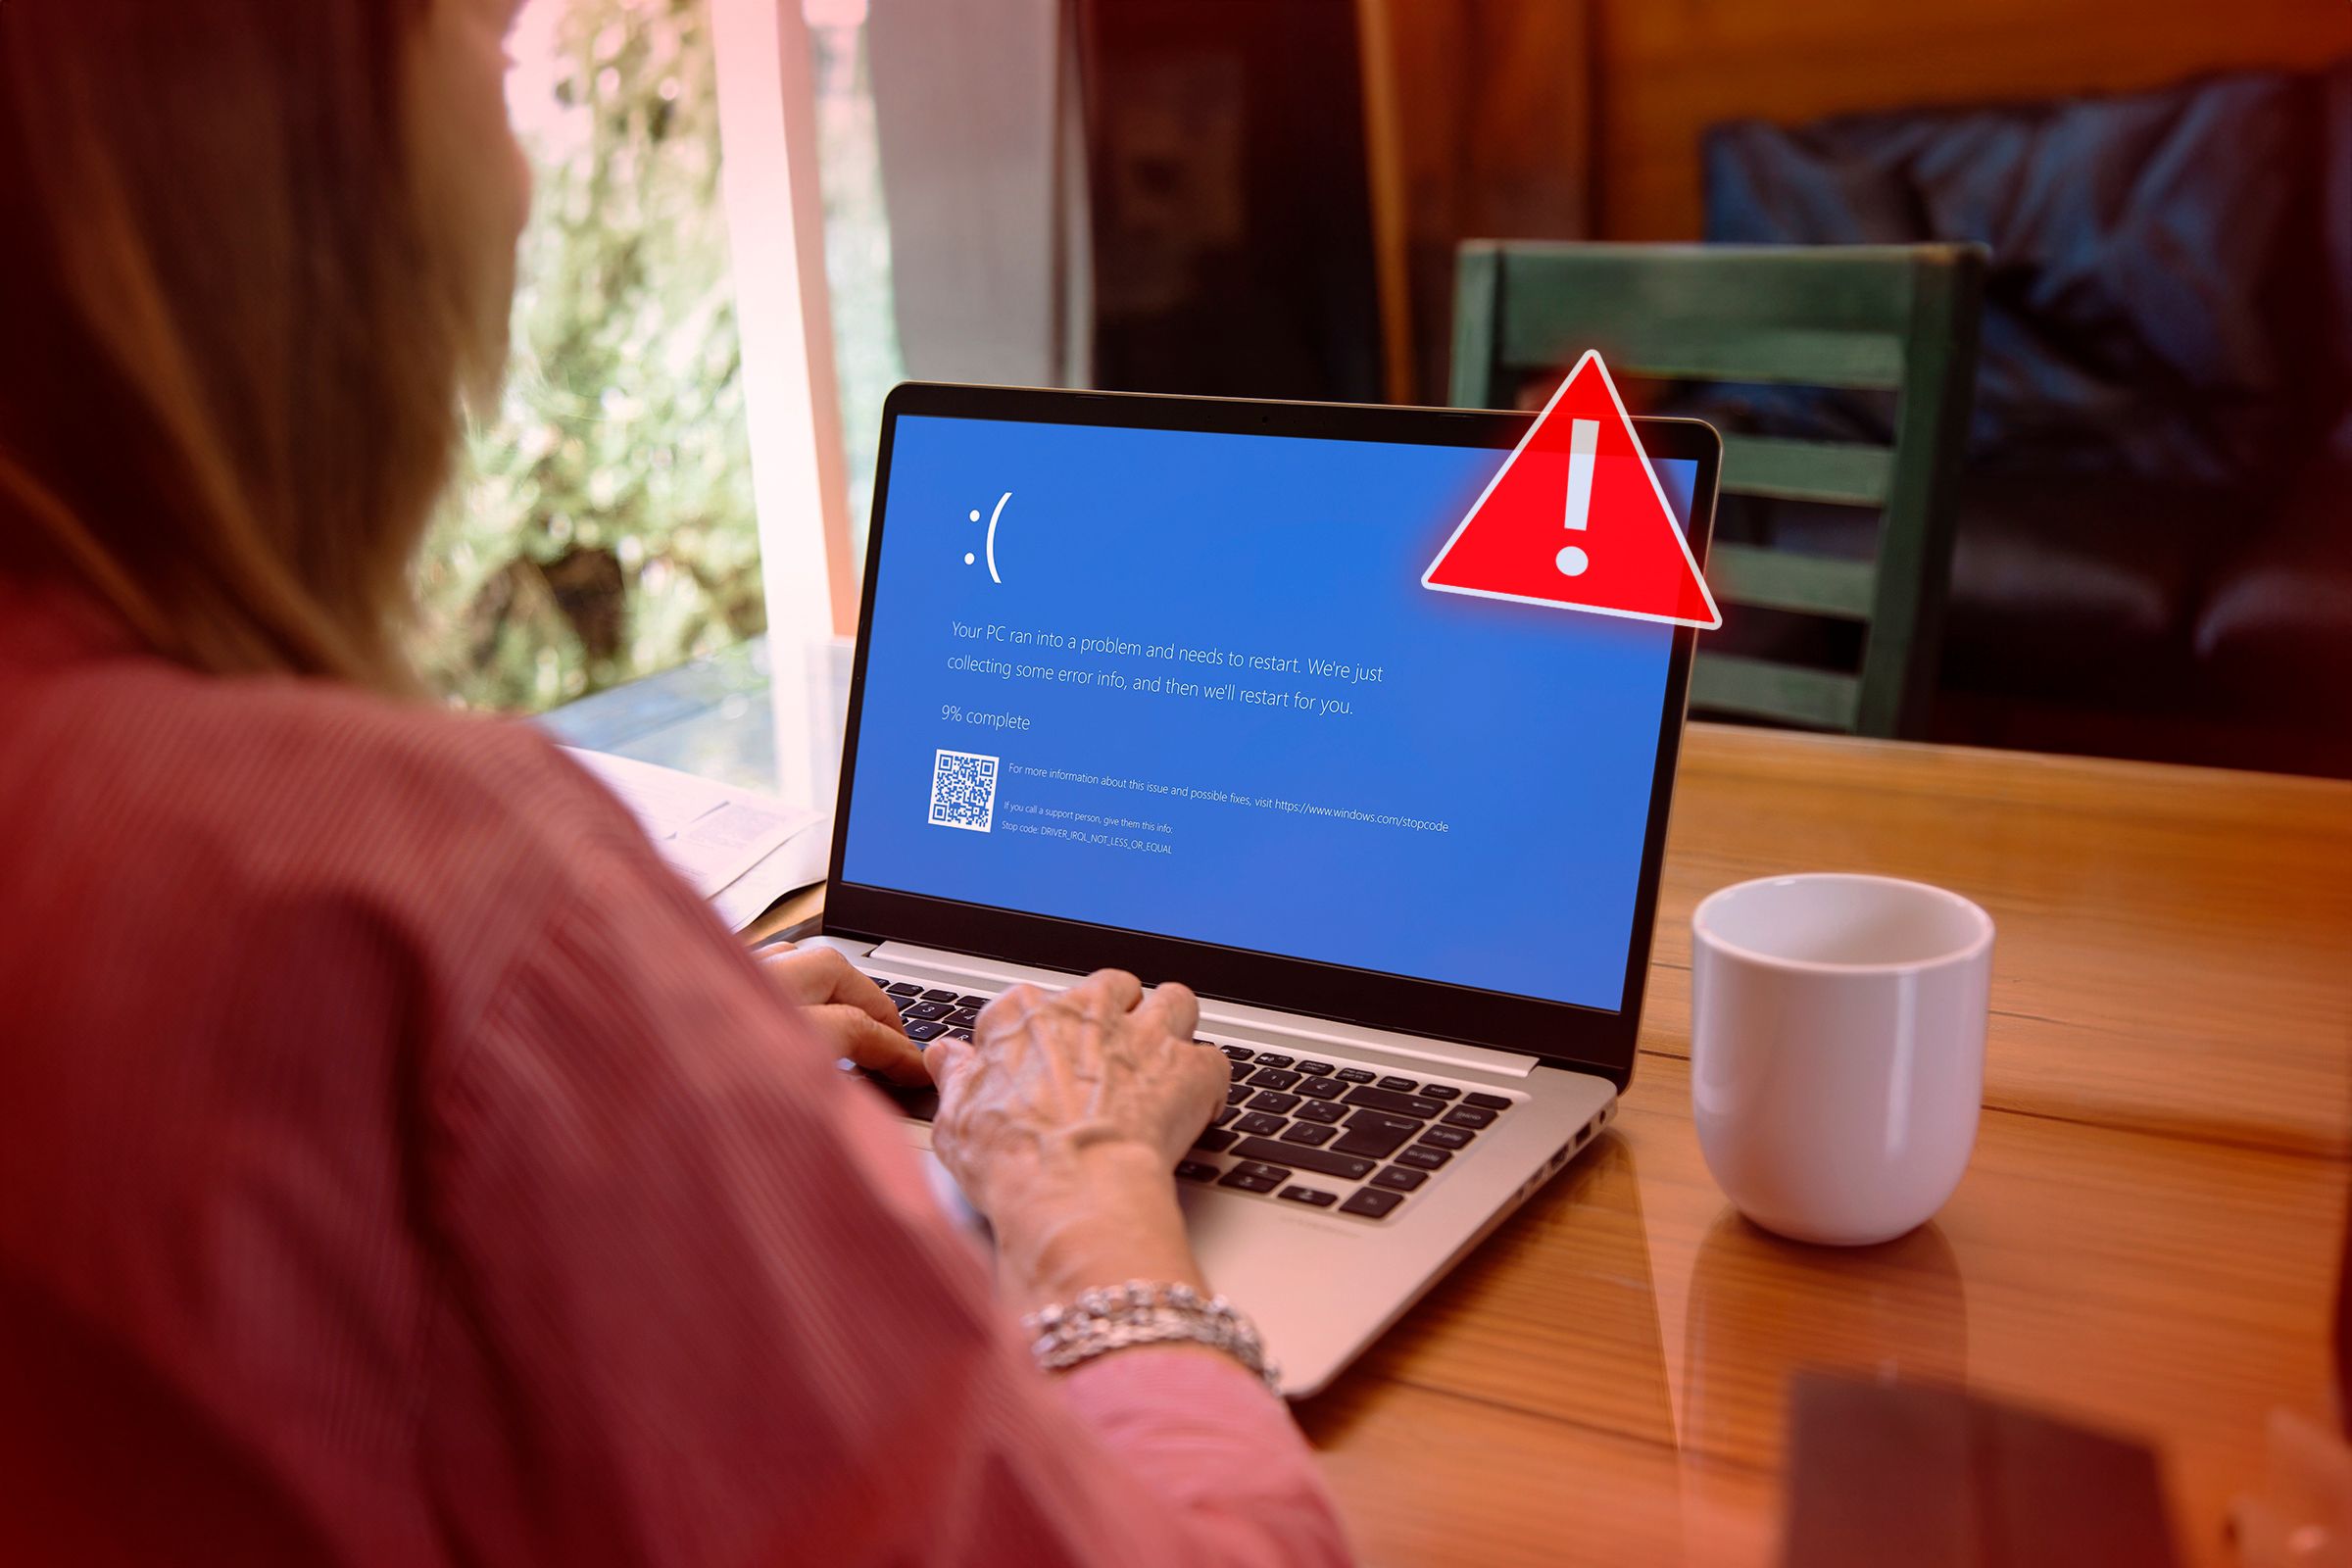 A woman using a laptop with a blue screen that appears when windows randomly shut down and an alert symbol on the front of the laptop